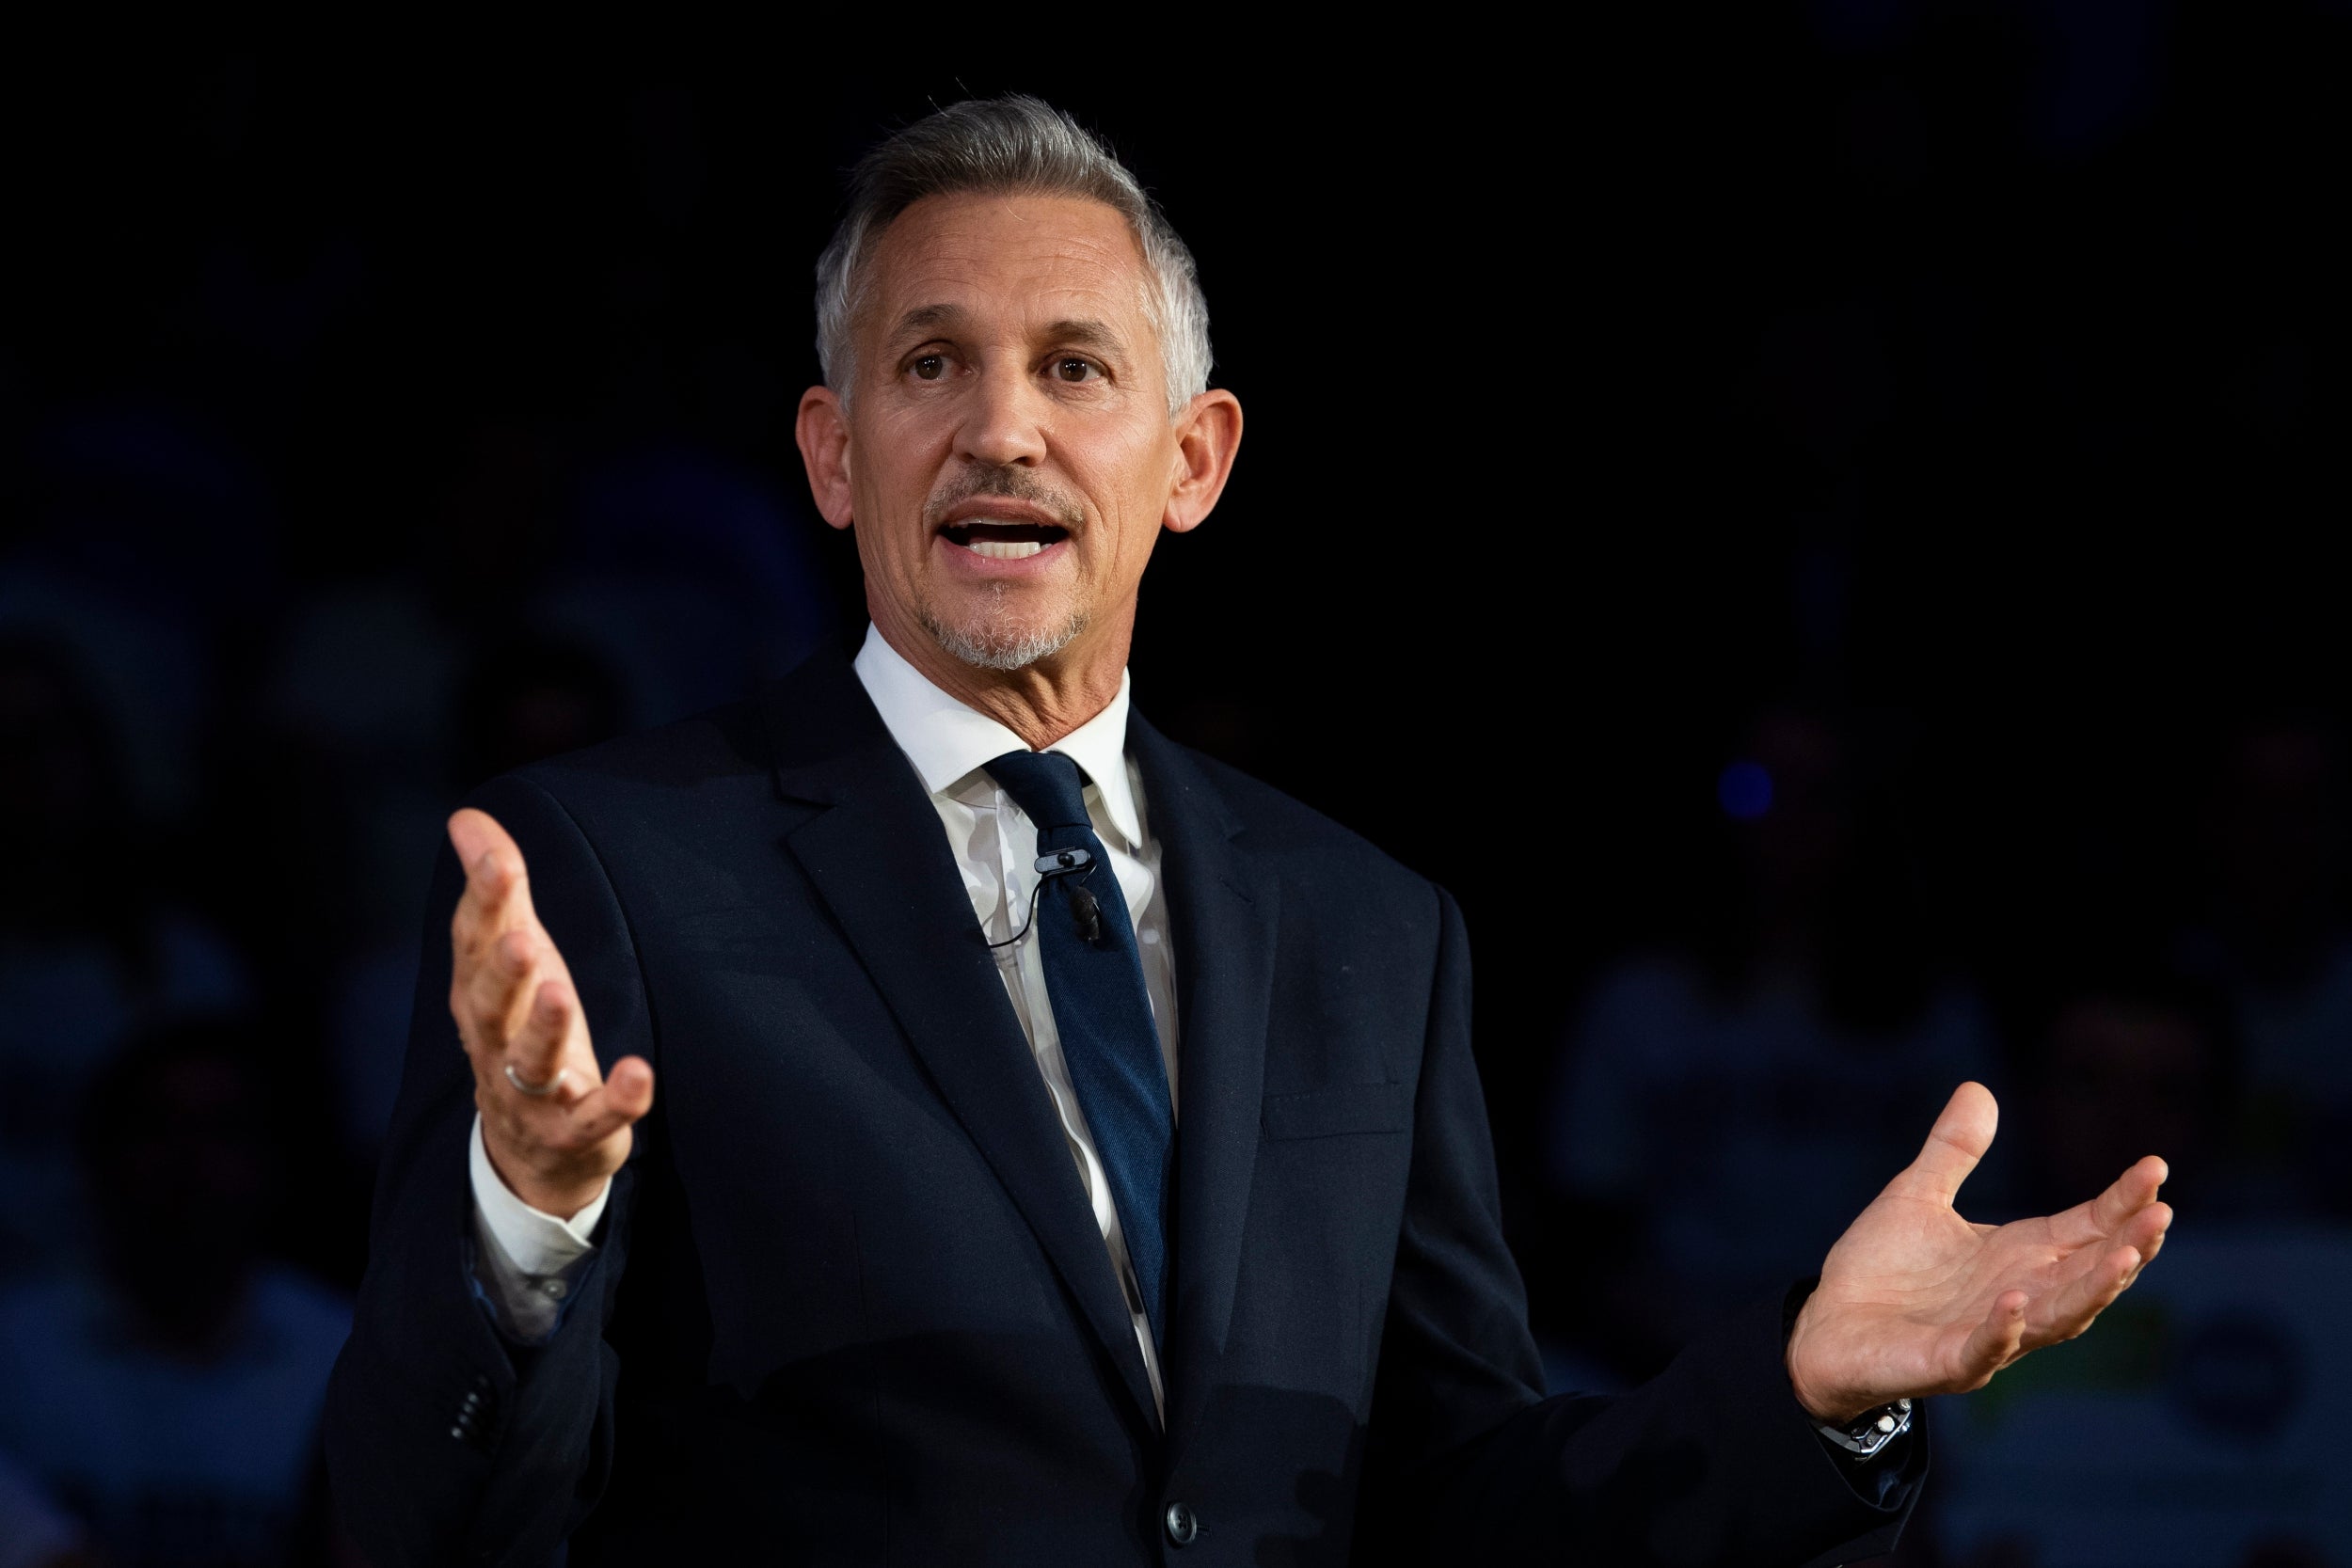 Gary Lineker has suggested the TV licence fee becomes a voluntary payment